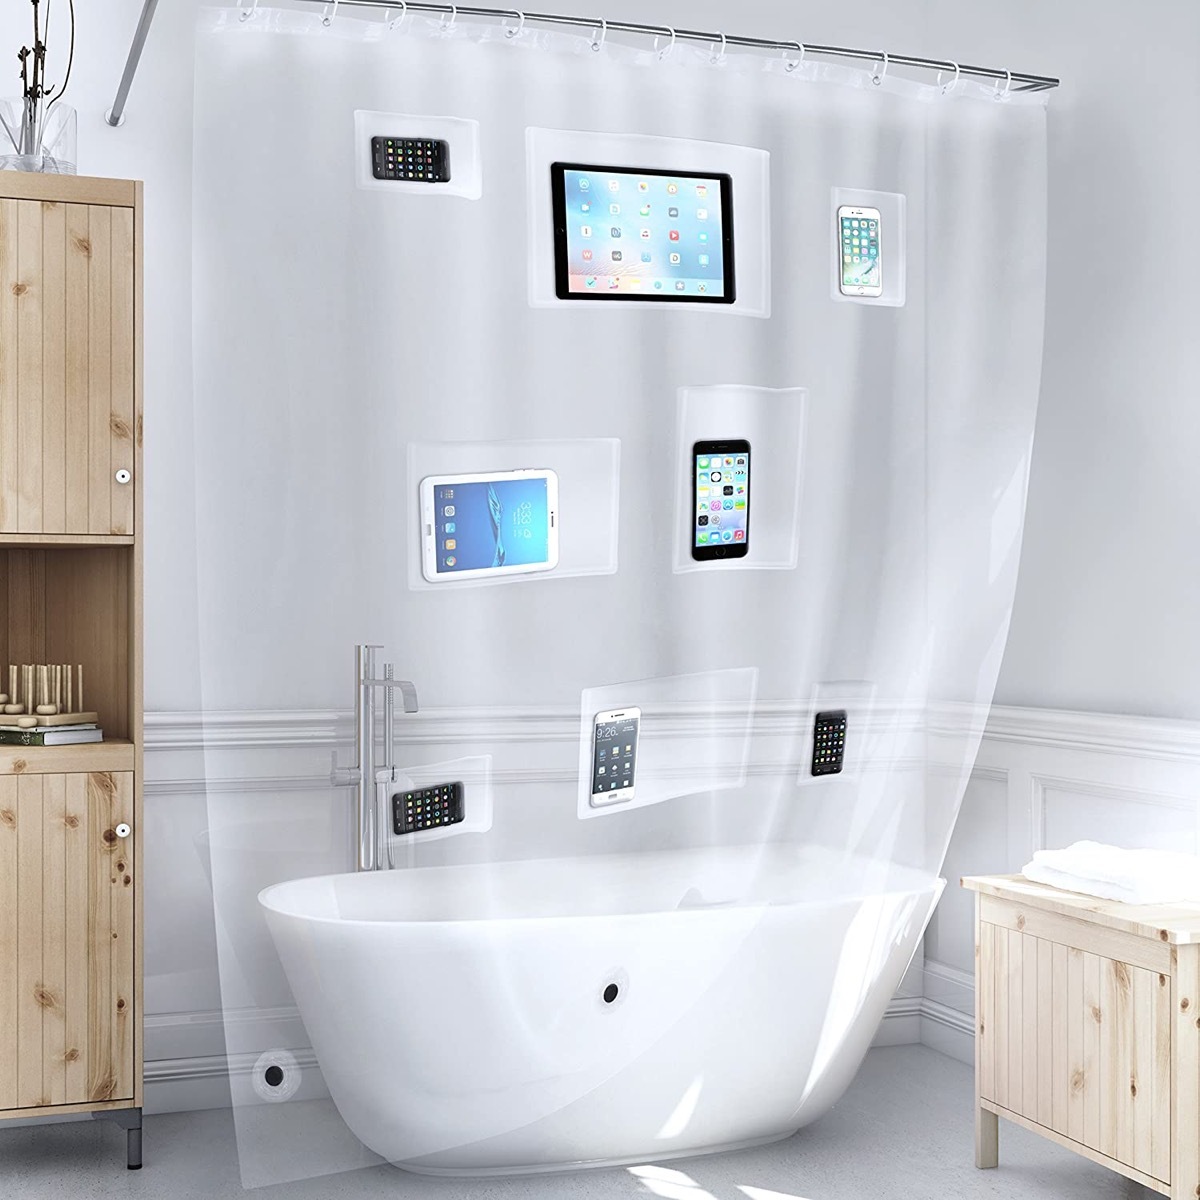 clear shower curtain with pockets and ipads